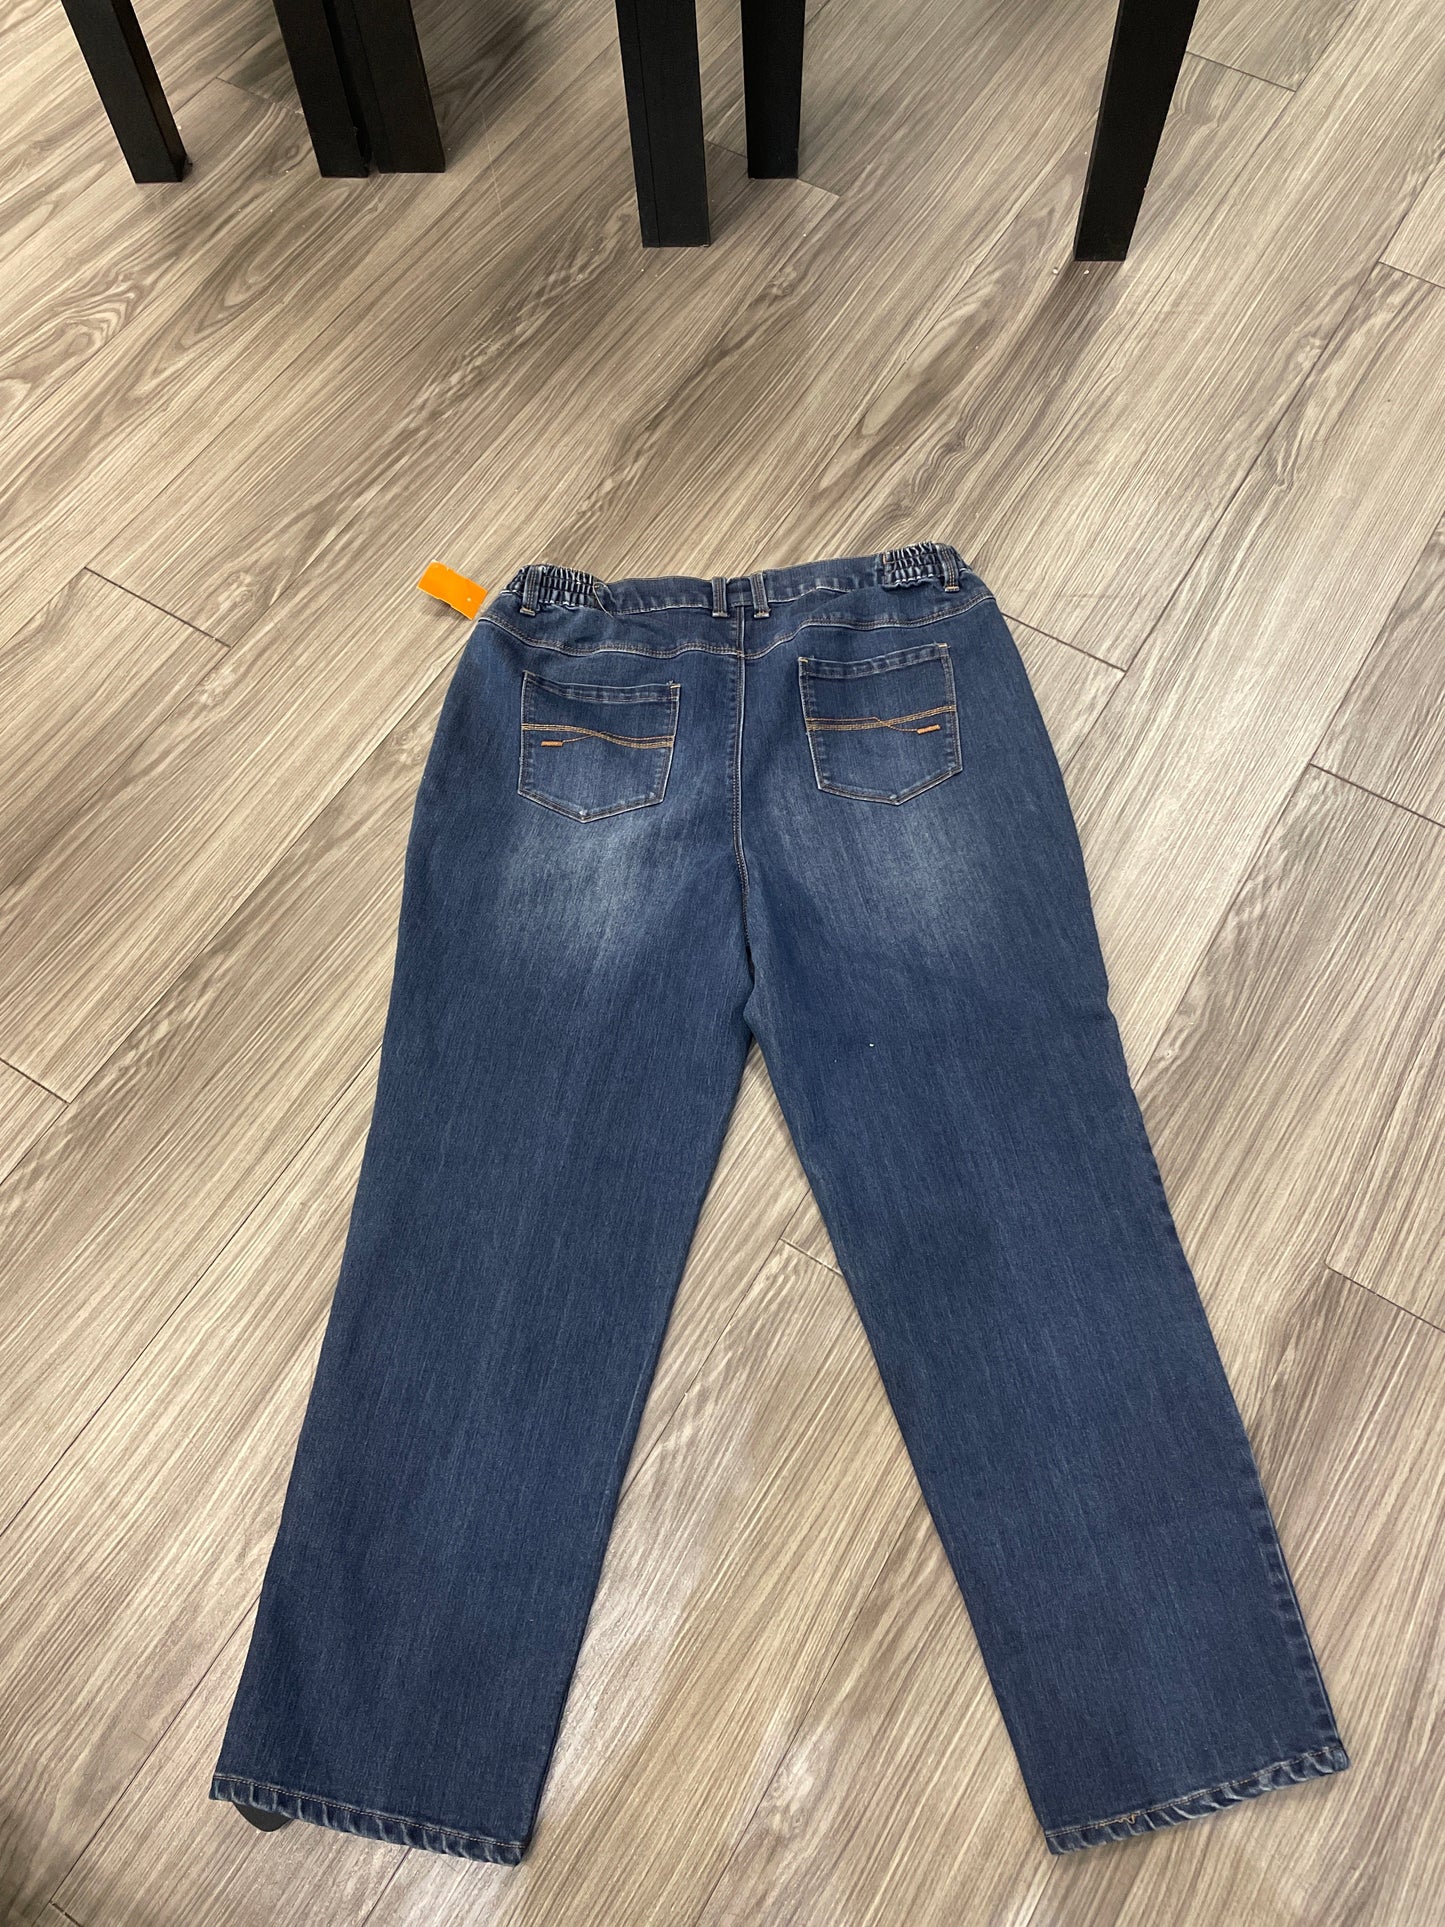 Jeans Boot Cut By Catherines  Size: 16